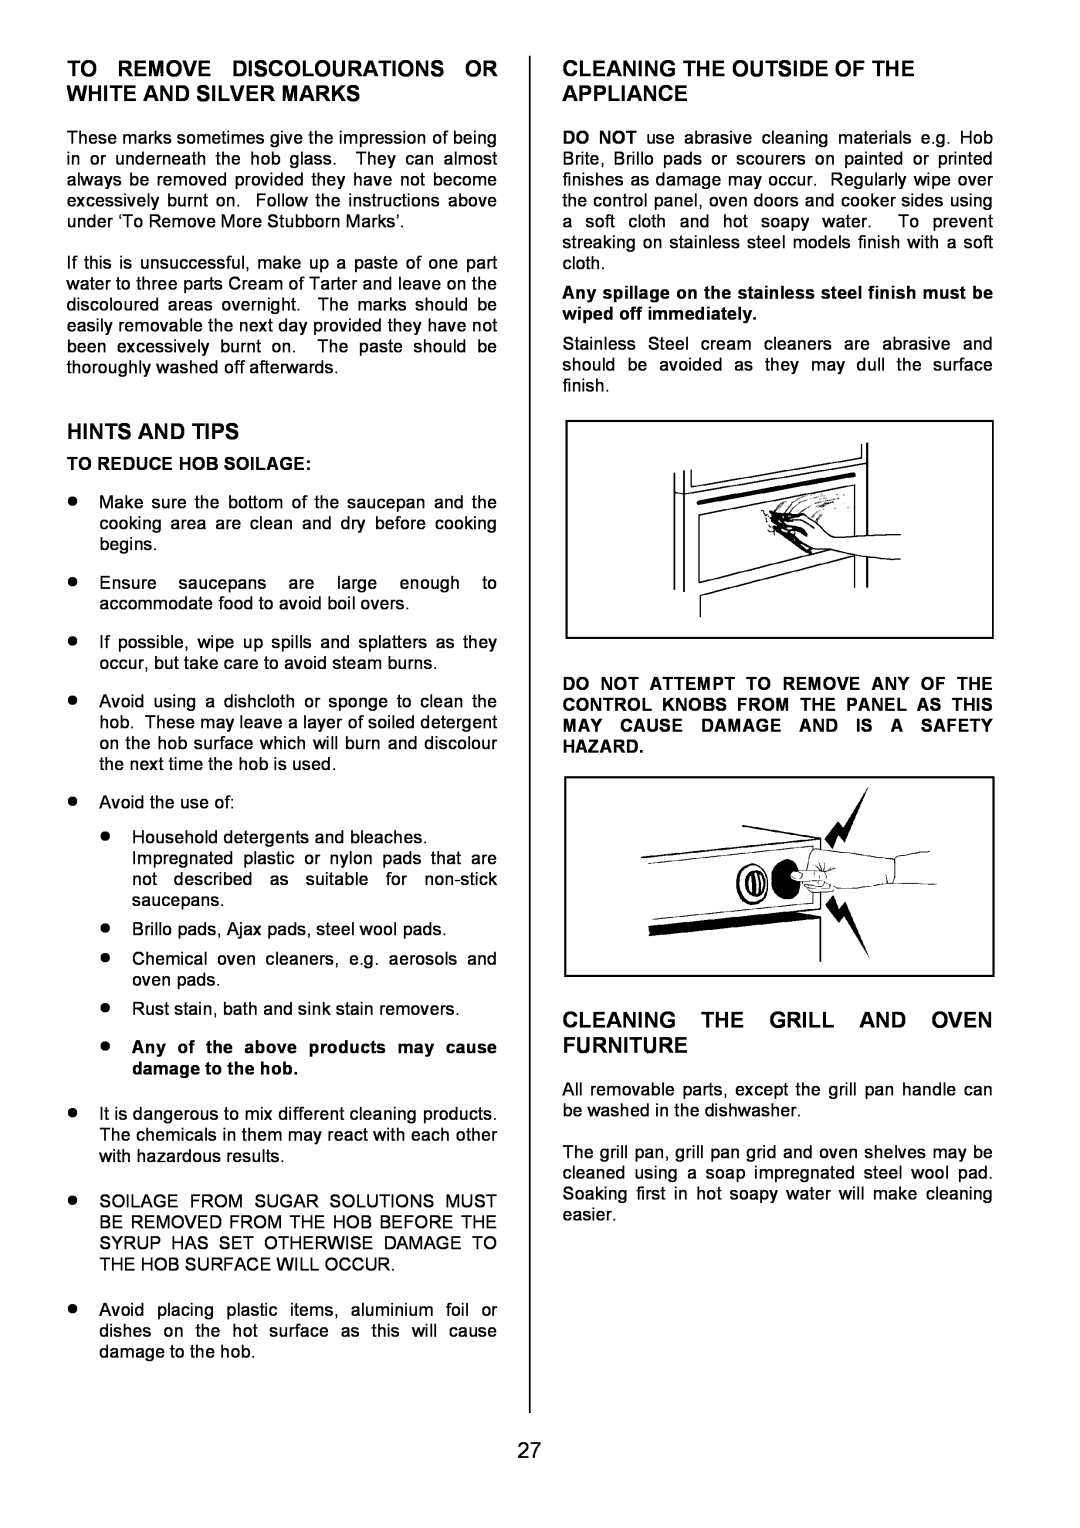 Zanussi ZCE 8021 manual Cleaning The Outside Of The Appliance, Cleaning The Grill And Oven Furniture, Hints And Tips 